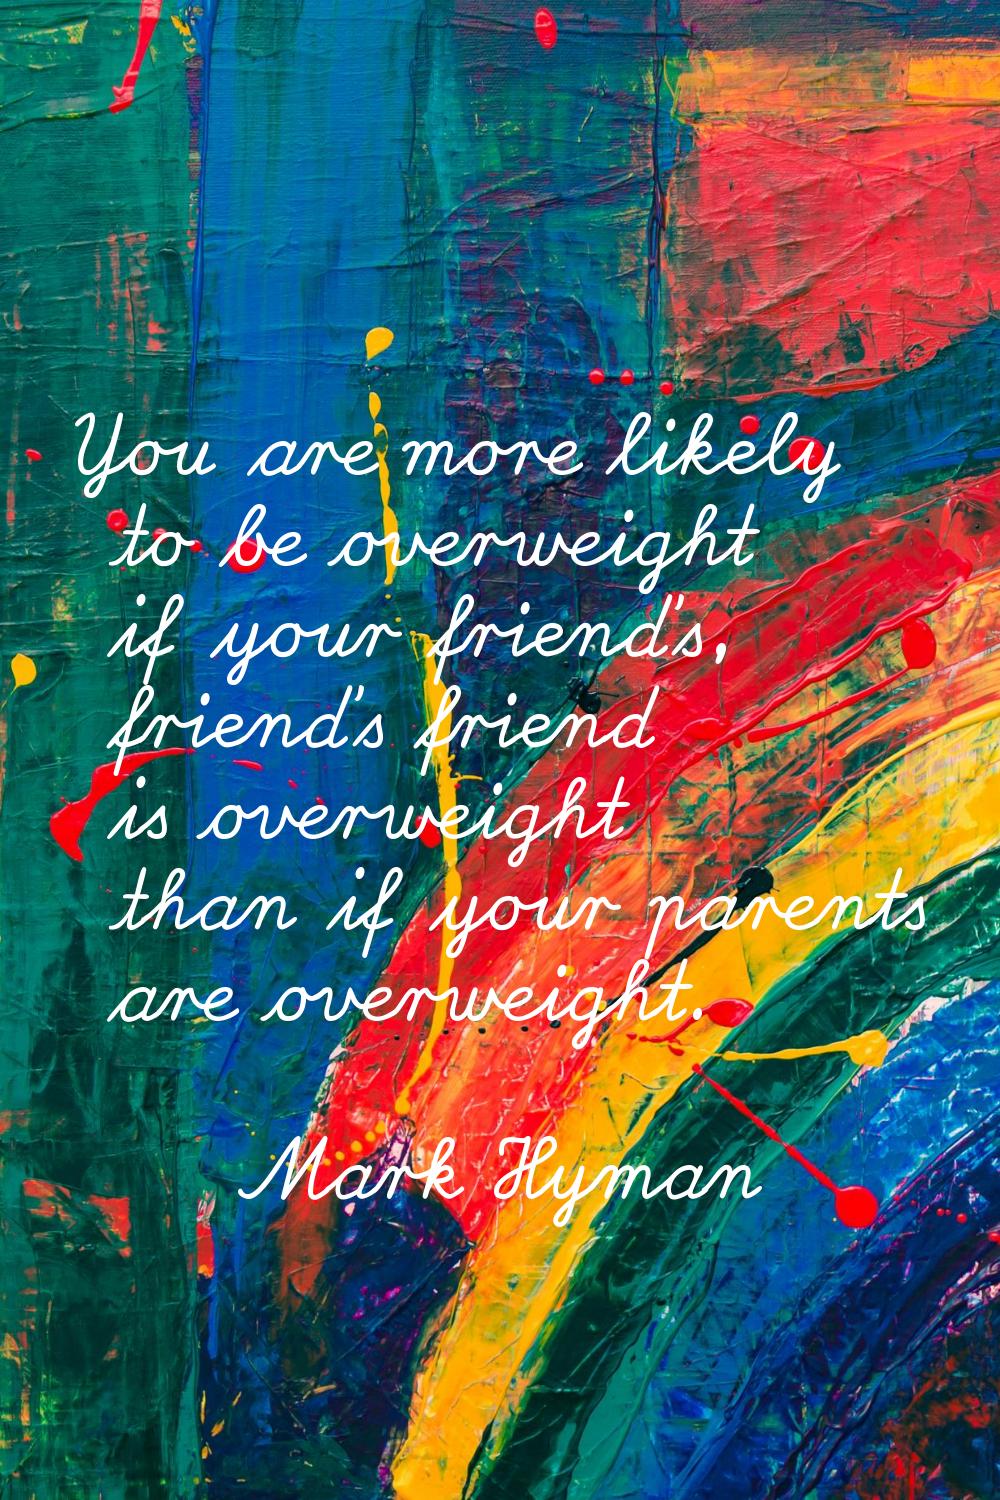 You are more likely to be overweight if your friend's, friend's friend is overweight than if your p